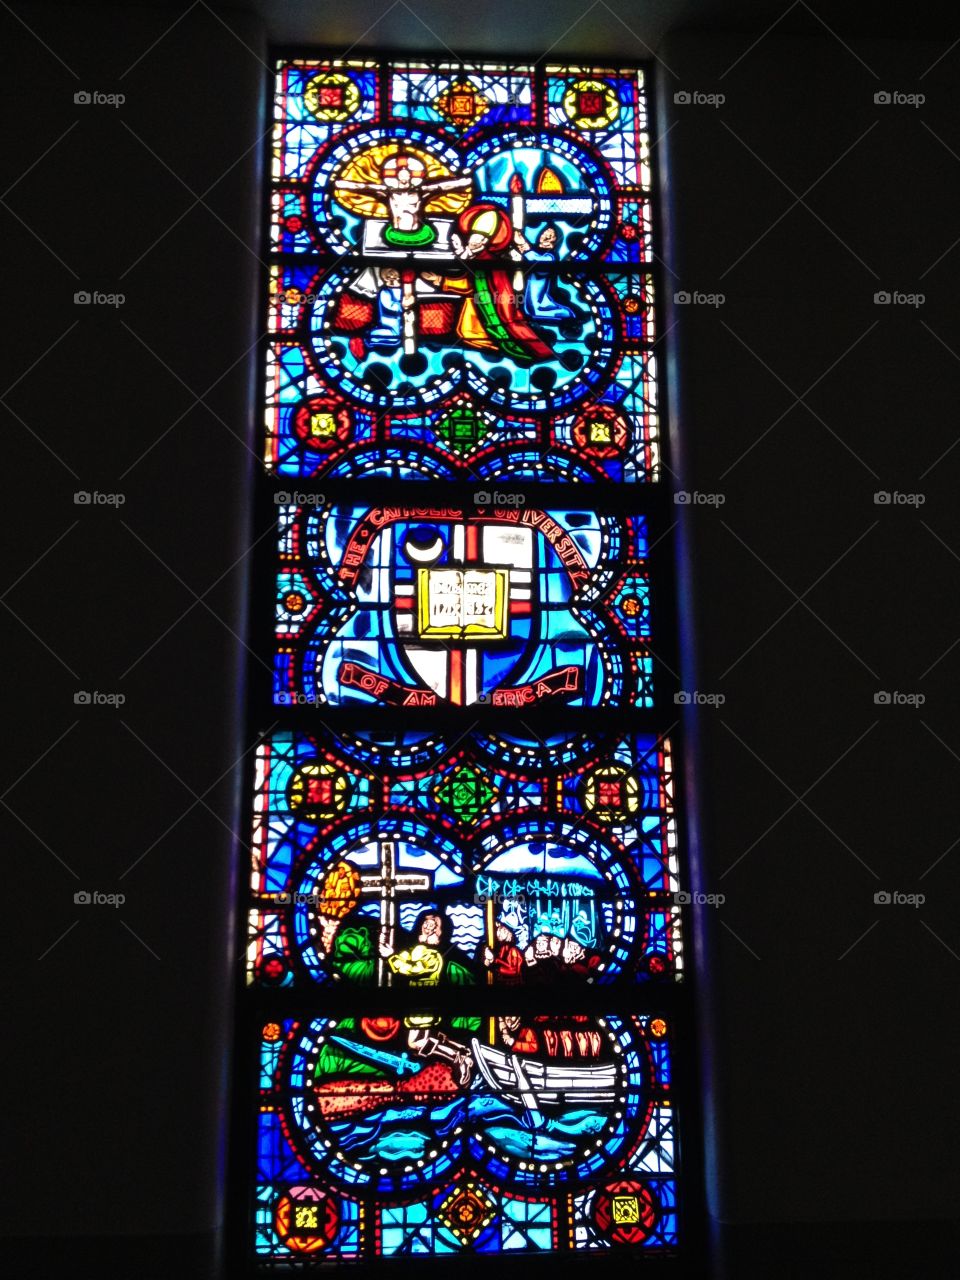 Stained glass. St. Augustine Church in Gainesville, FL